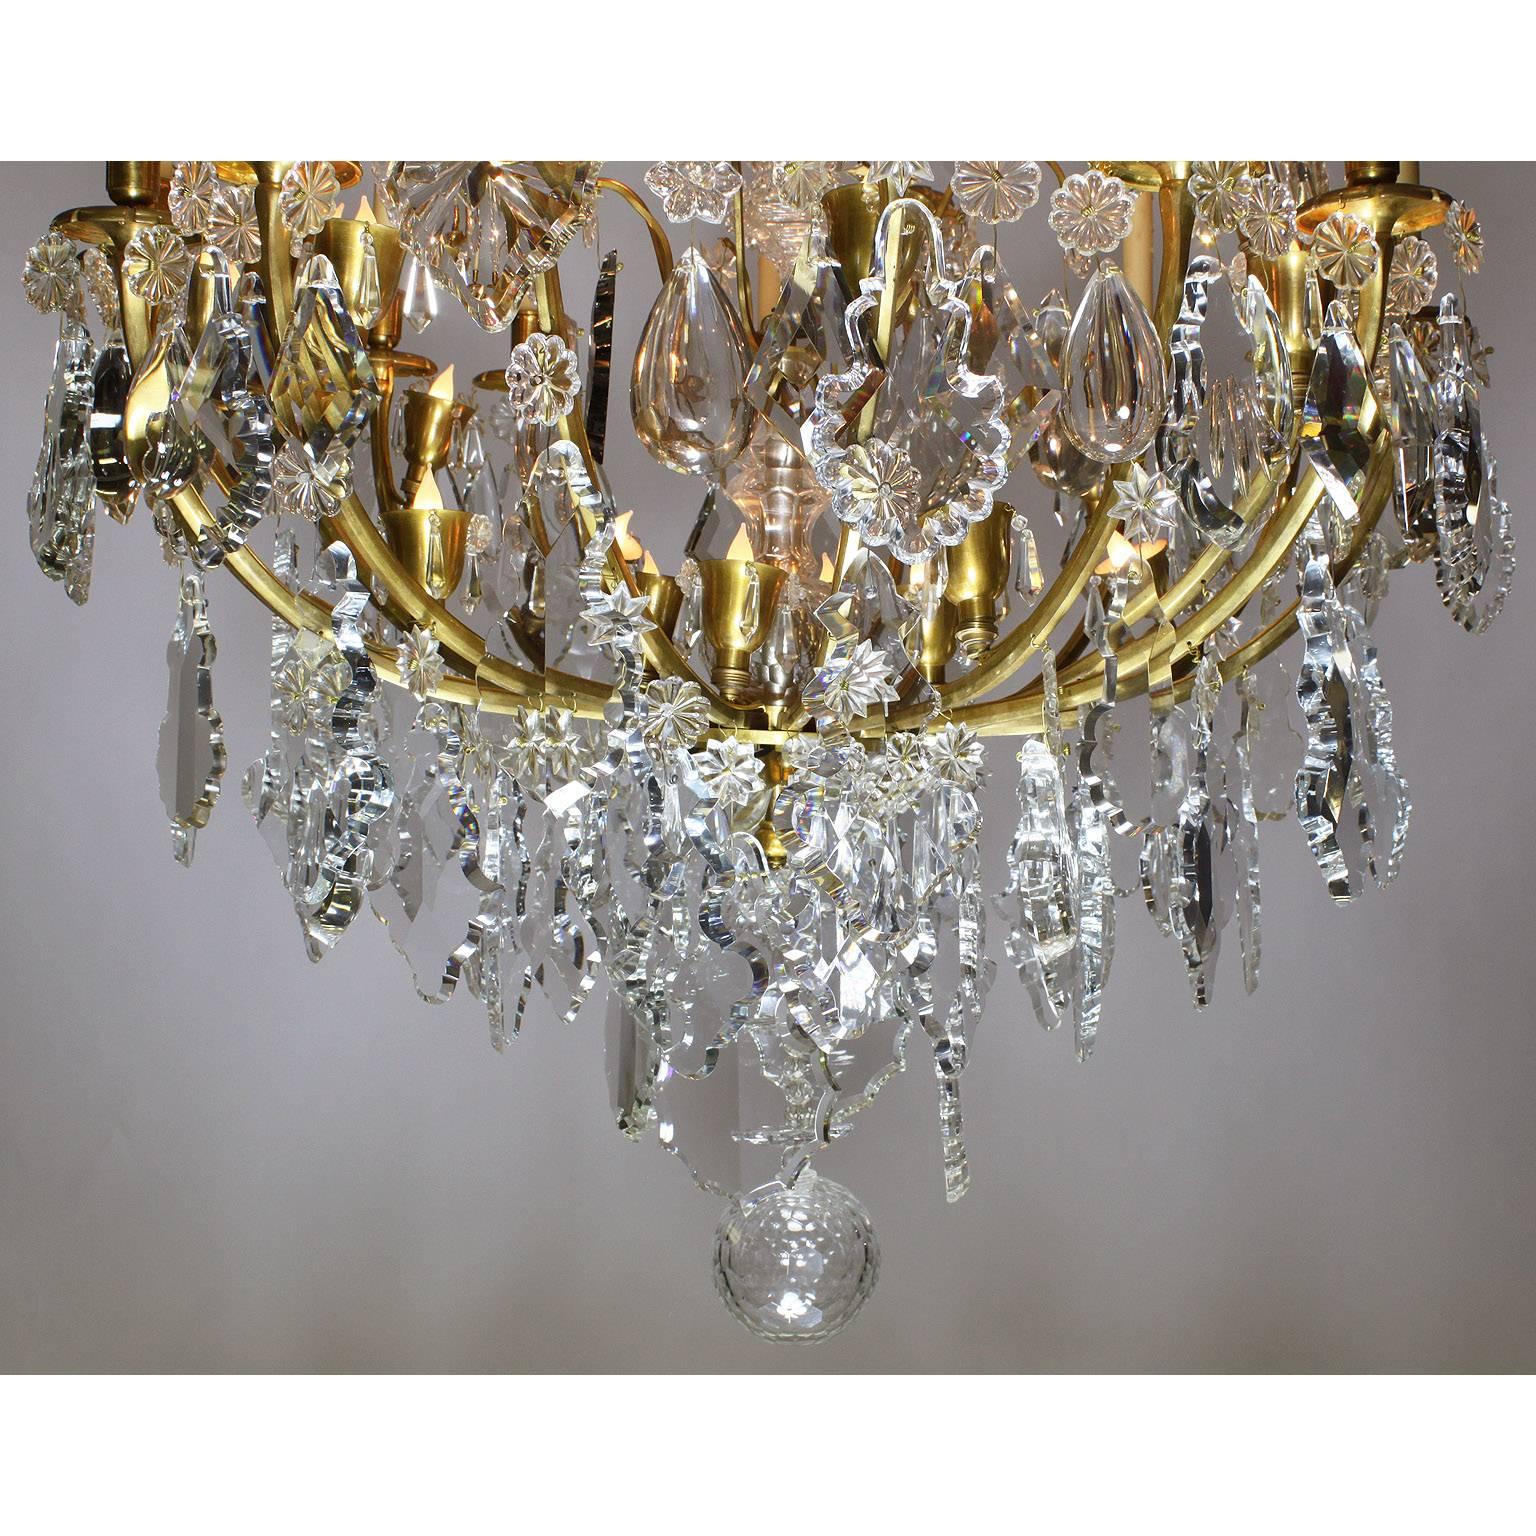 French 19th Century Louis XV Style Gilt-Bronze and Crystal Chandelier For Sale 3